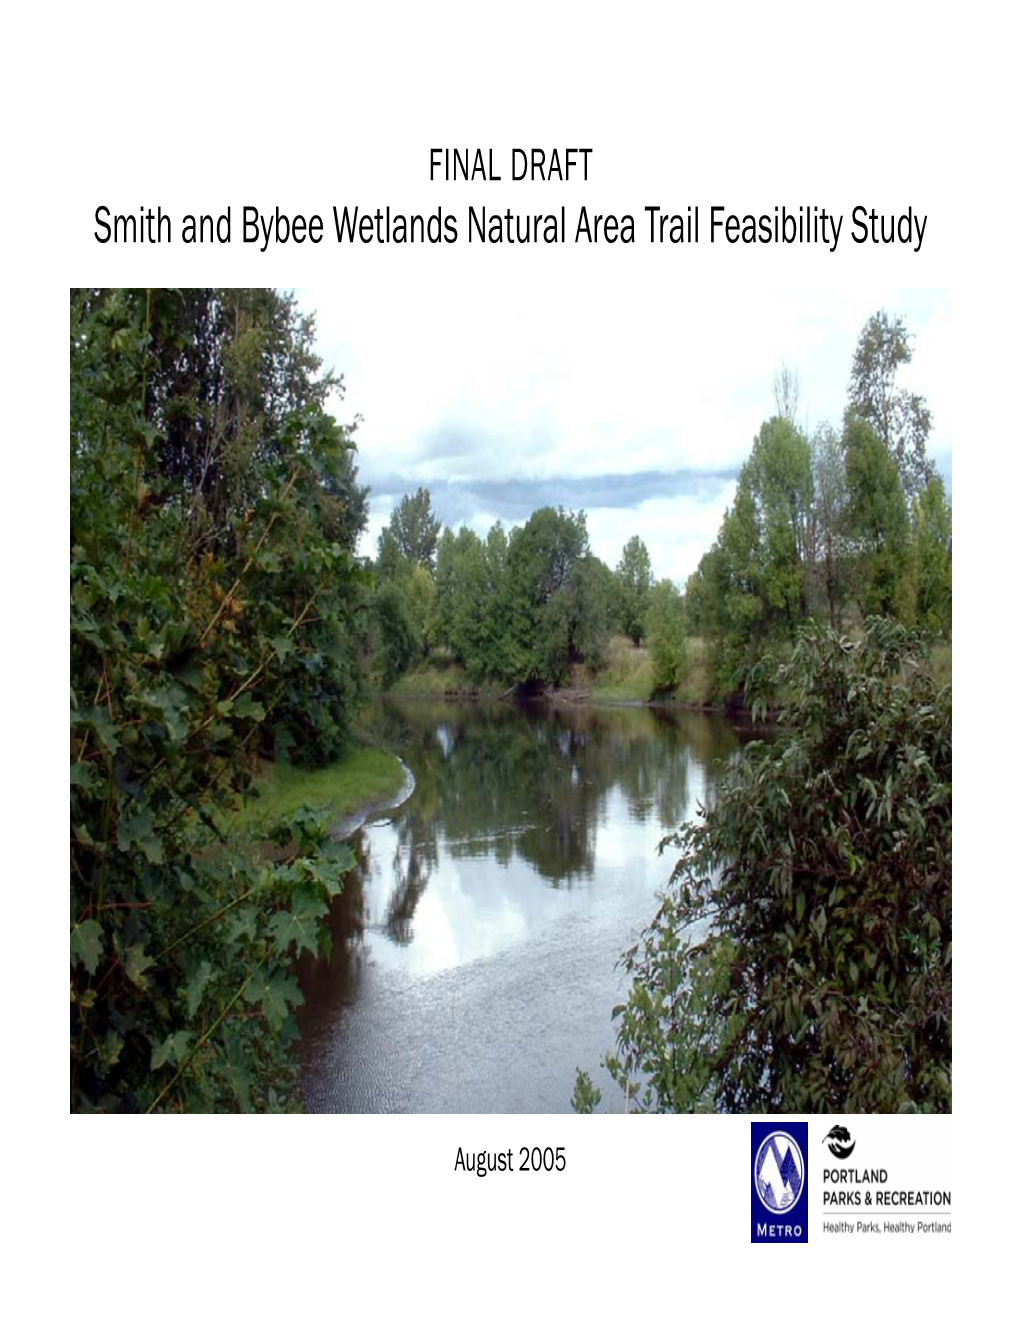 Smith and Bybee Wetlands Natural Area Trail Feasibility Study